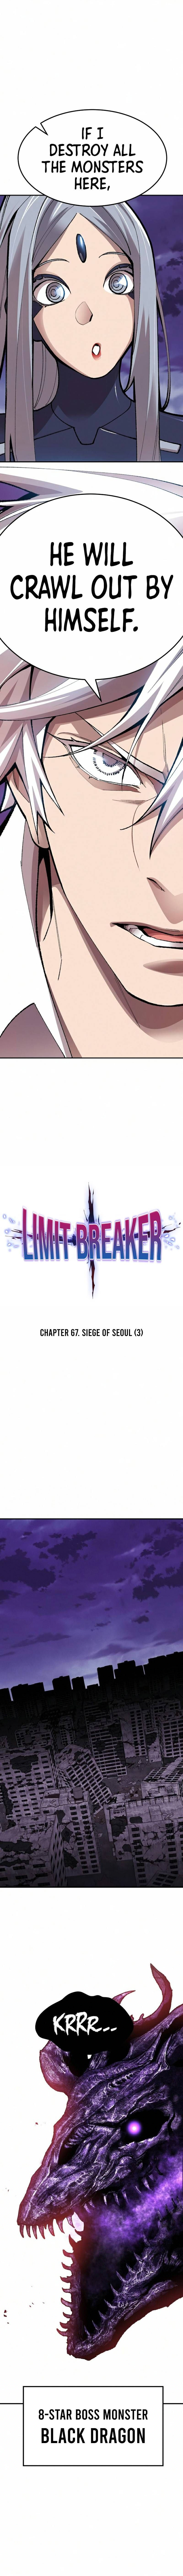 Limit Breaker Chapter 67 page 5